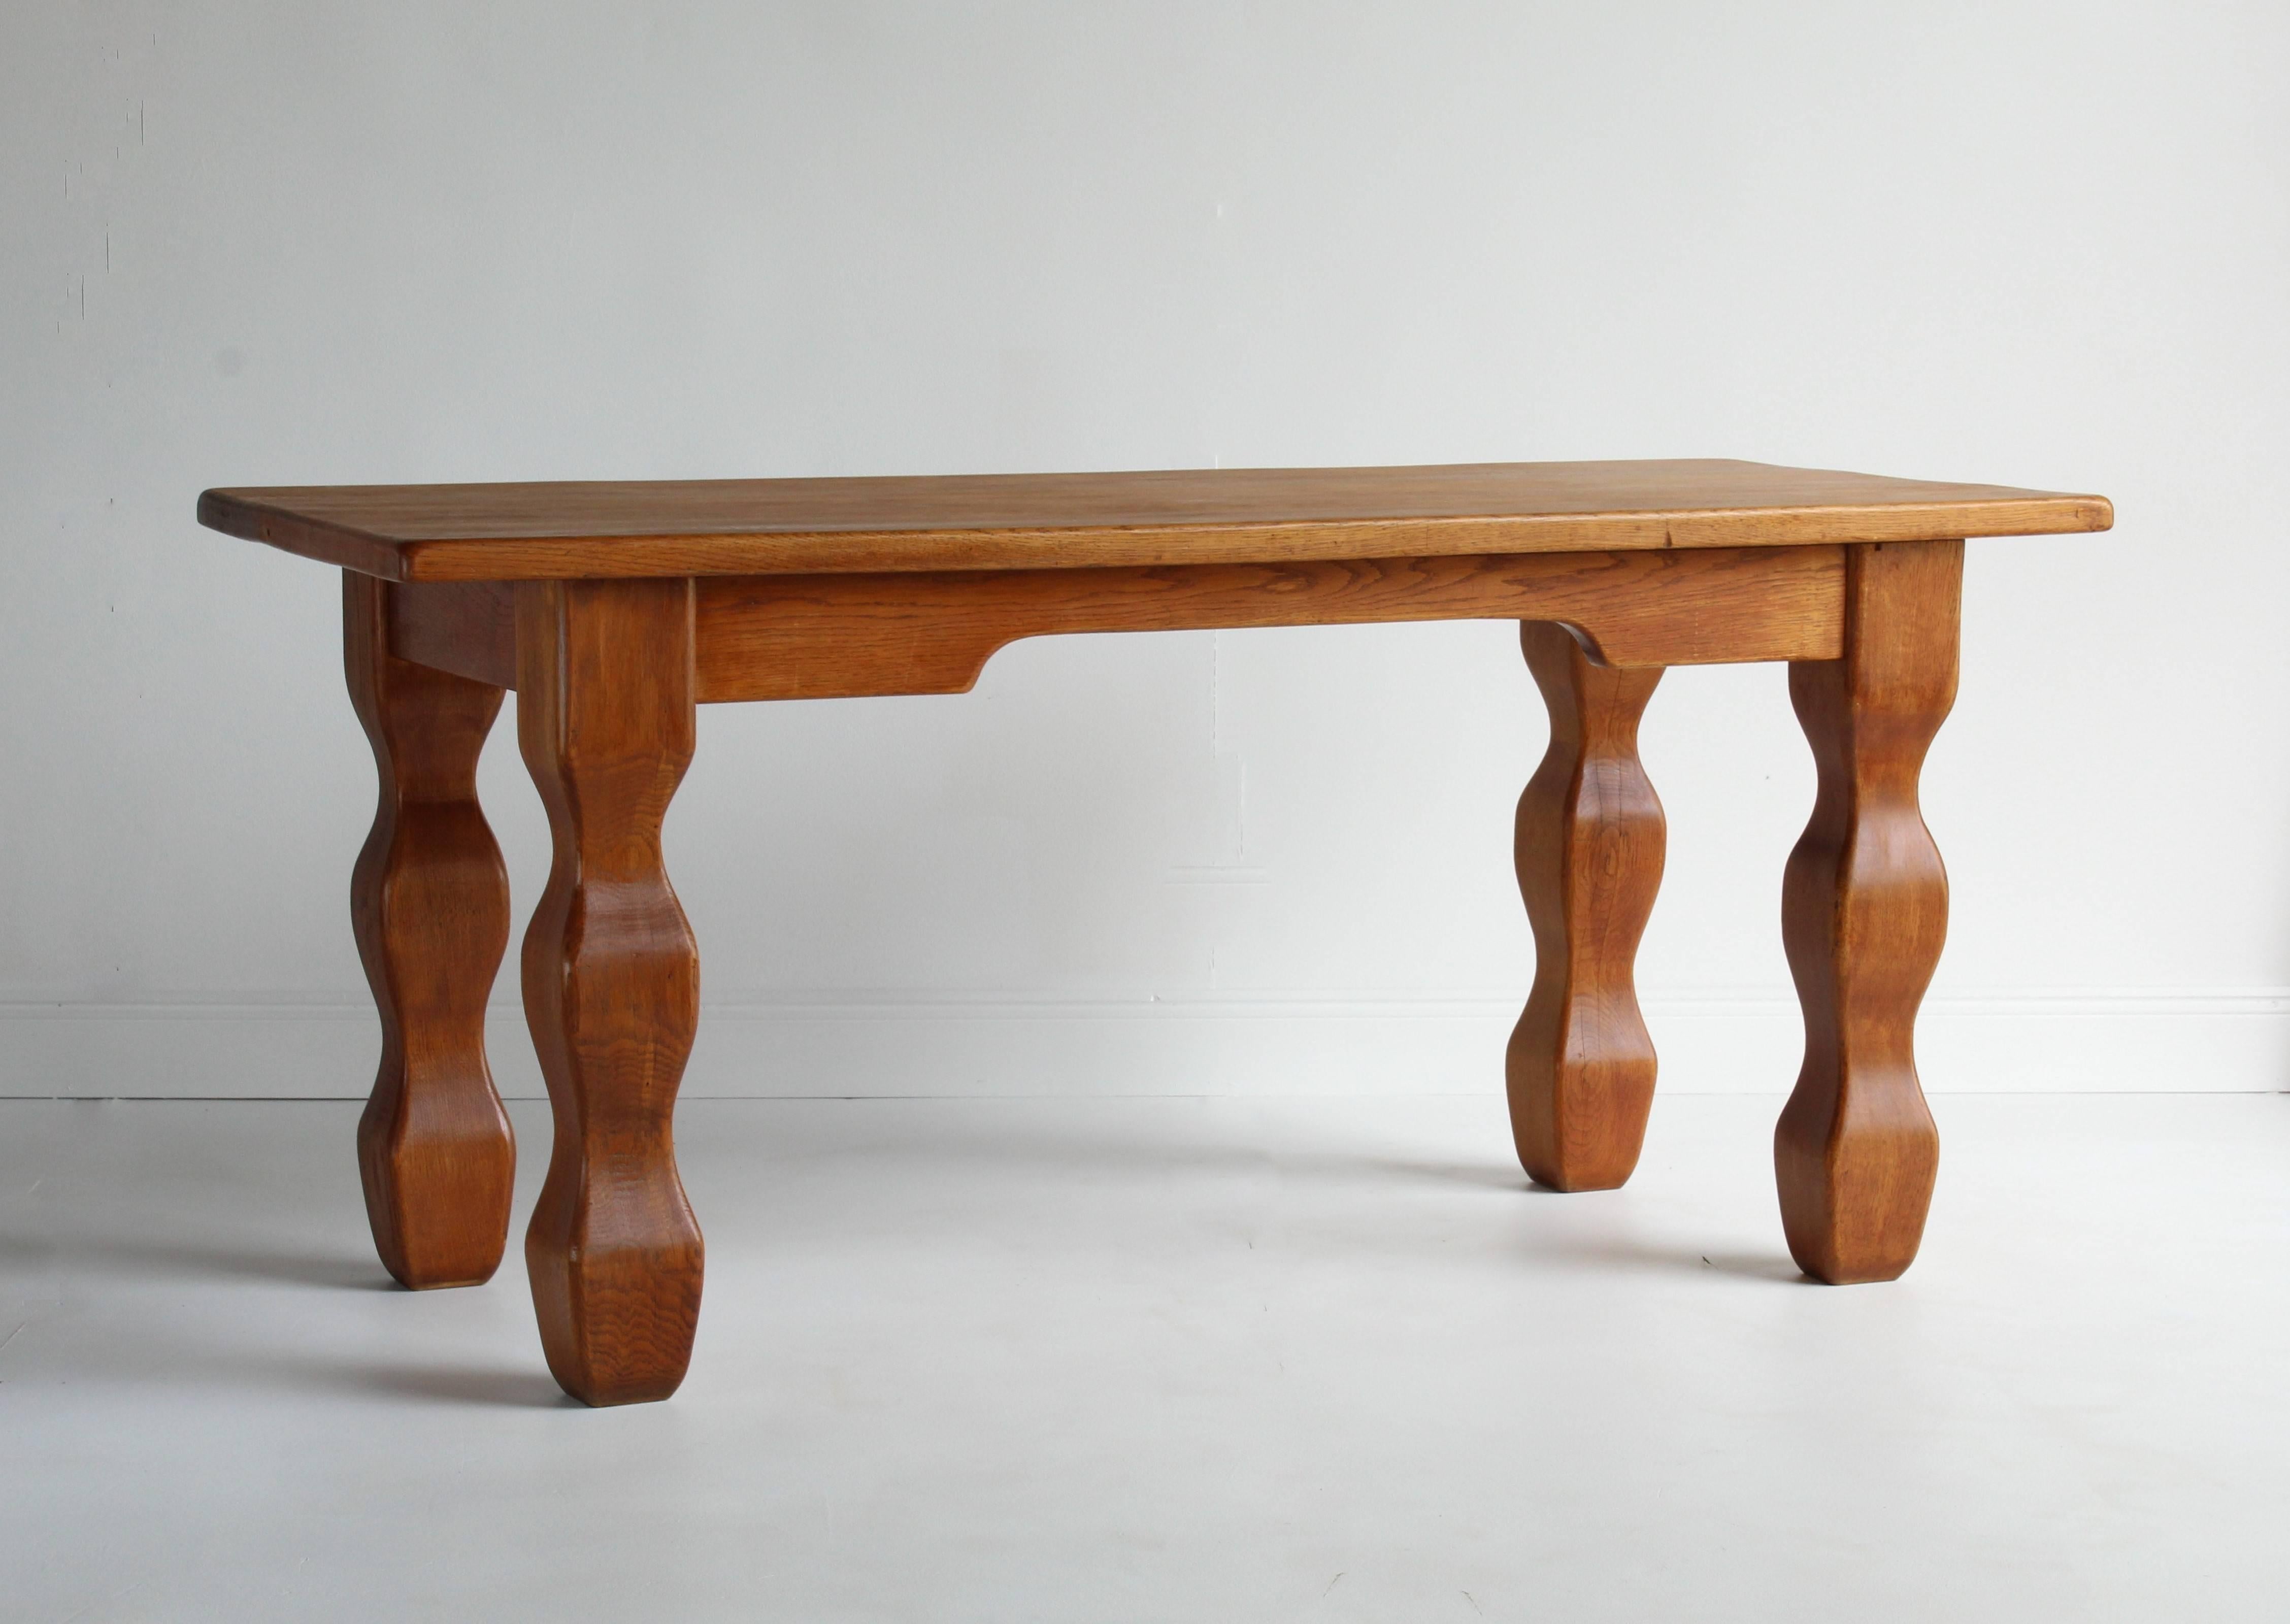 A unique, modernist oak desk / library table by Danish cabinetmaker Børge Clausen. Made in the studio of the artist, Denmark, 1940s. 

The absence of drawers gives the desk a pure and sculptural appearance. Clausen's reductionist approach and the